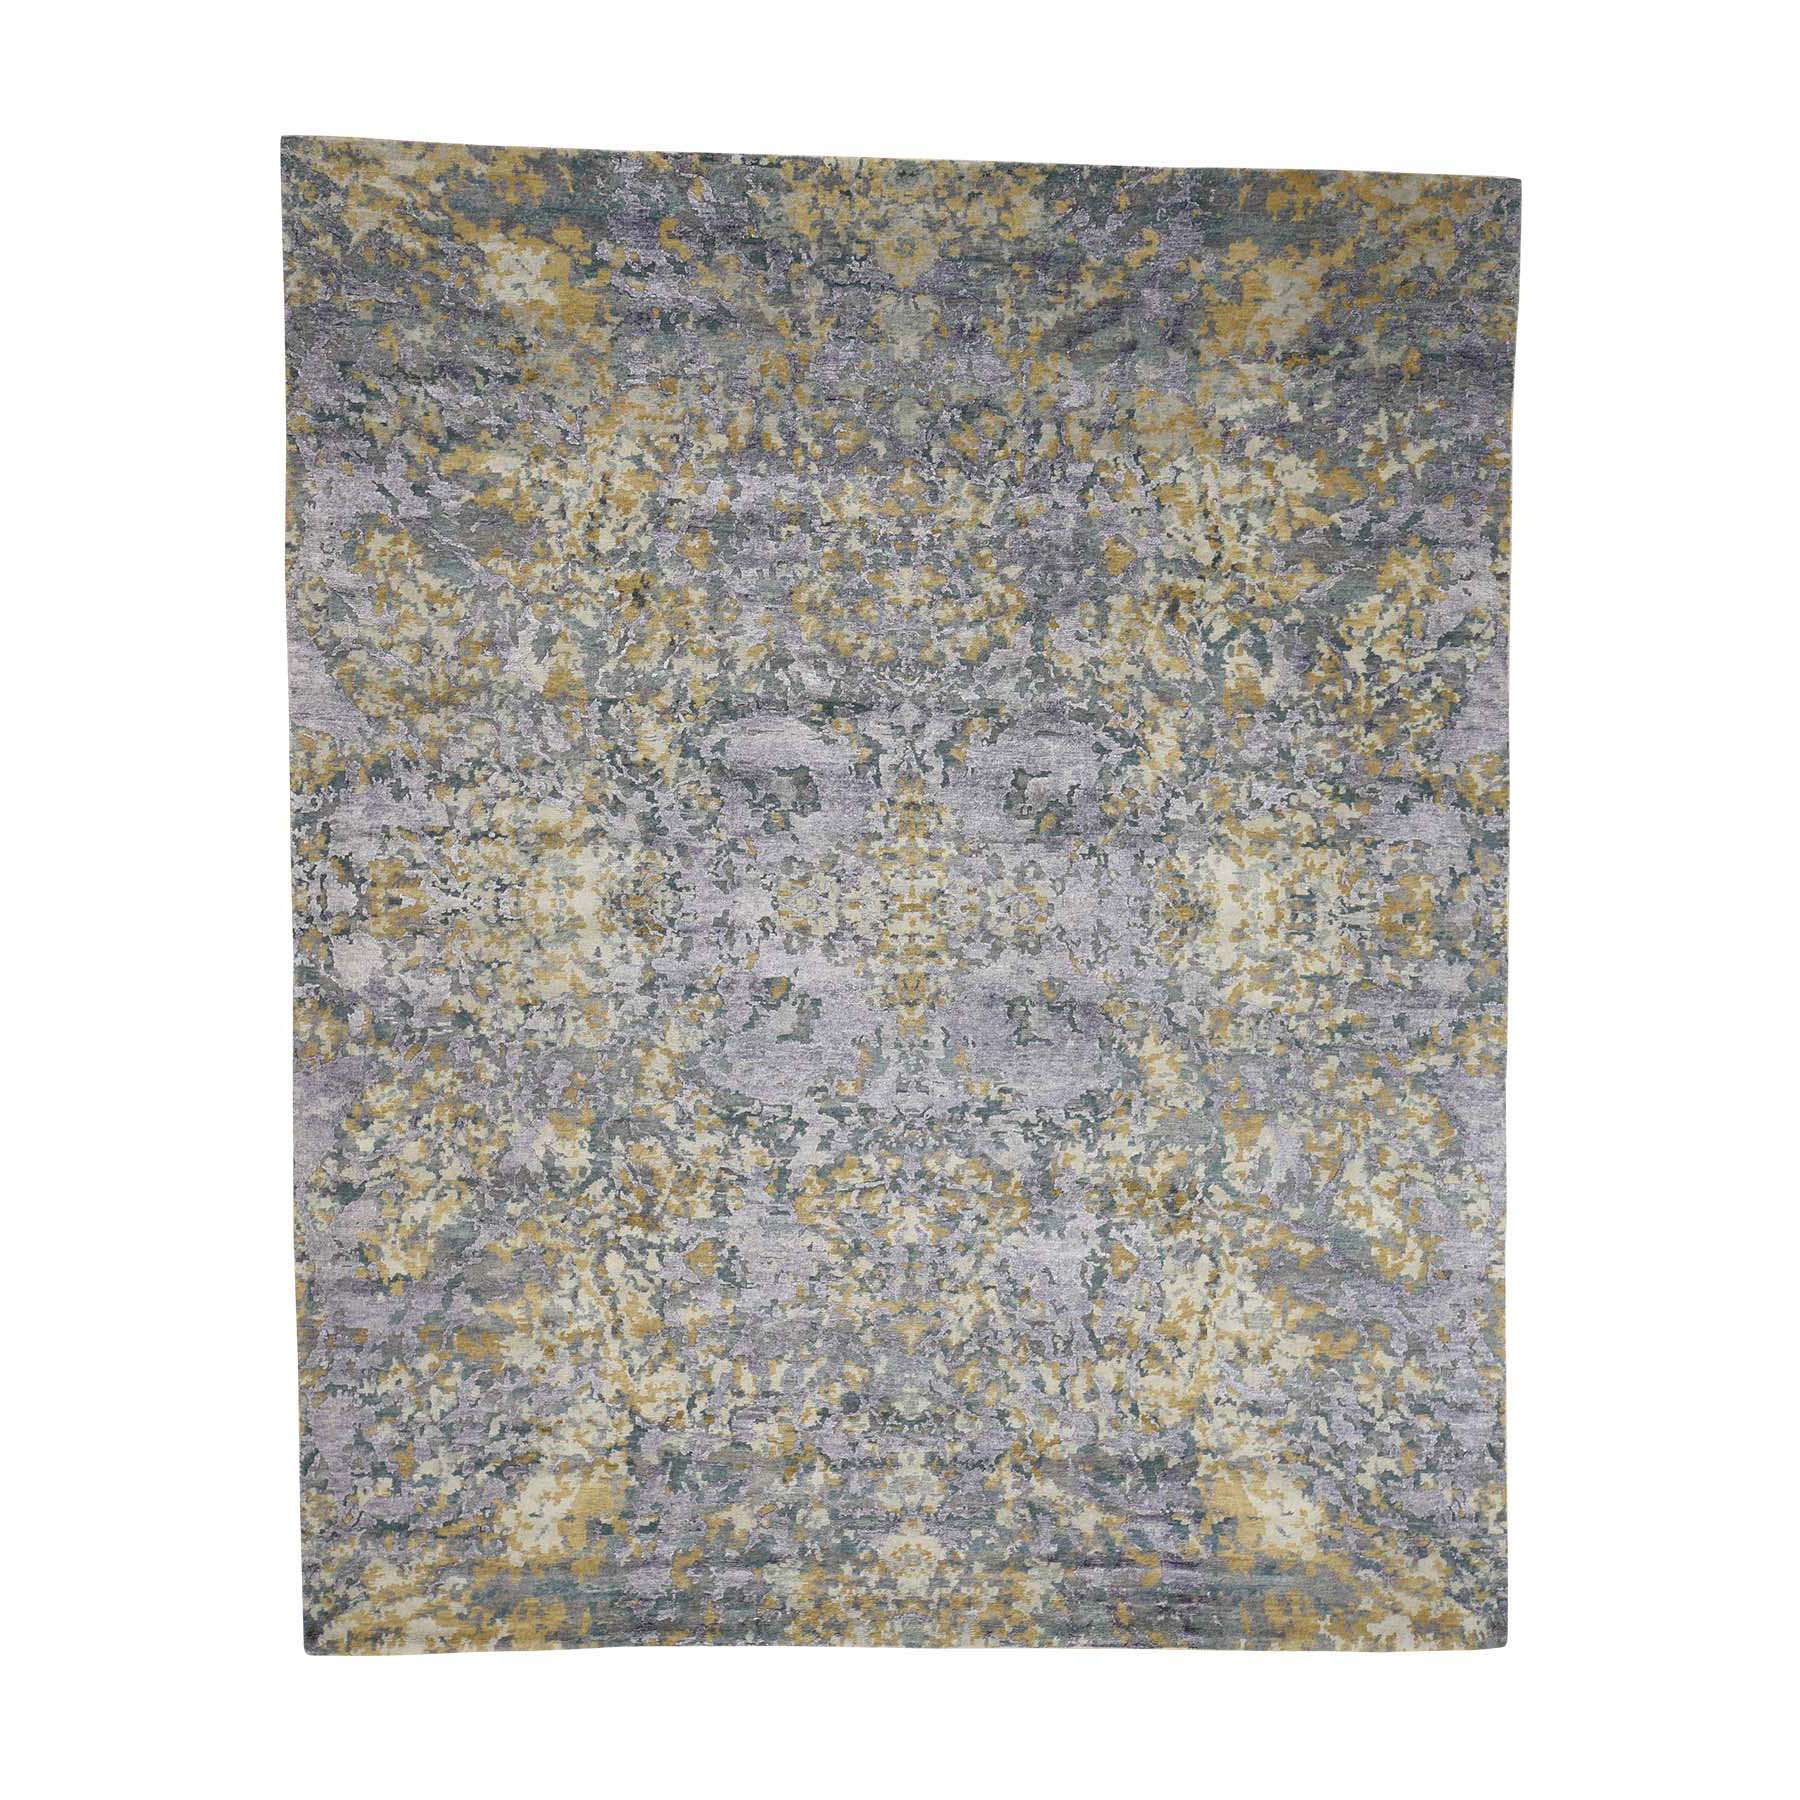 8'x9'10" Abstract Design Wool and Silk Hi-Lo Pile Hand Woven Rug 